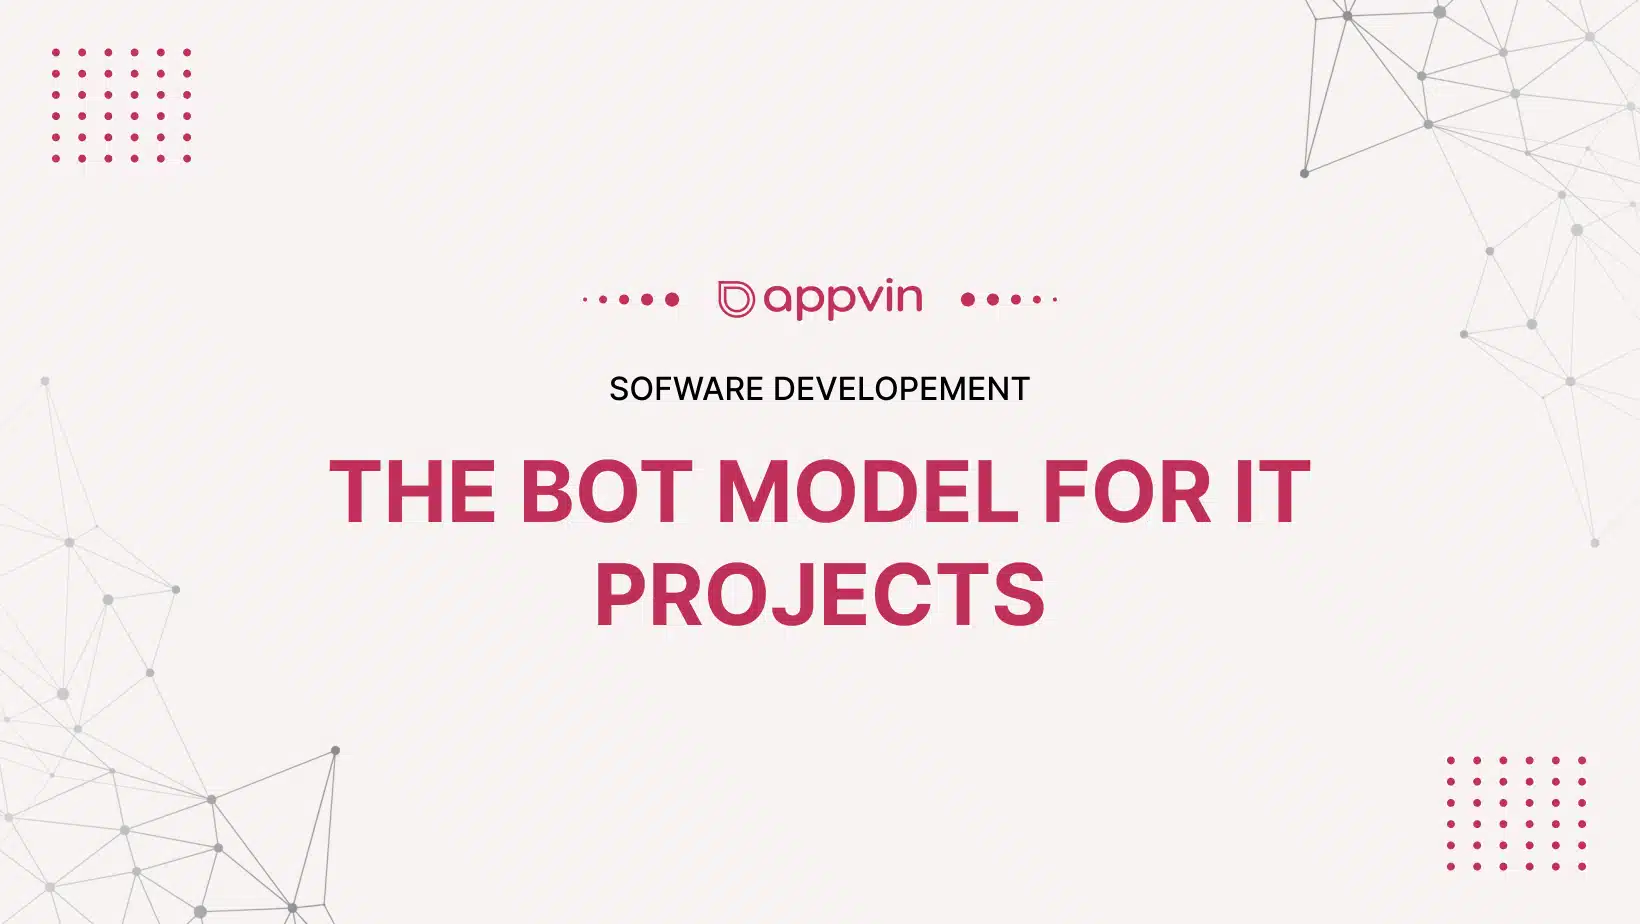 The BOT Model for IT Projects